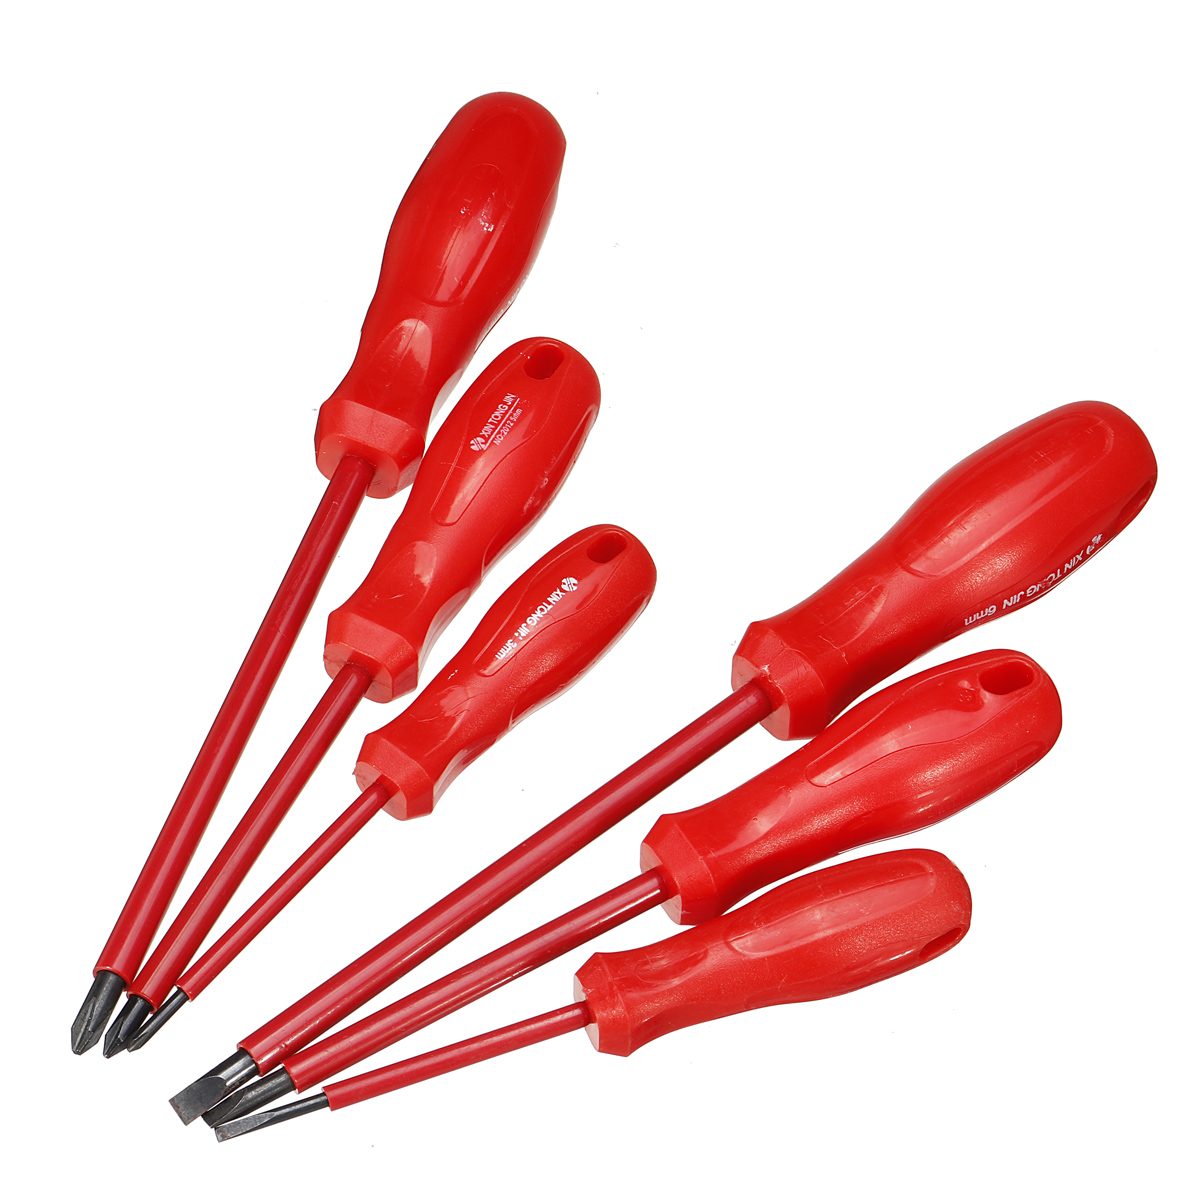 1000V-Electronic-Insulated-Hand-Screwdriver-Repair-Tool-1633166-3